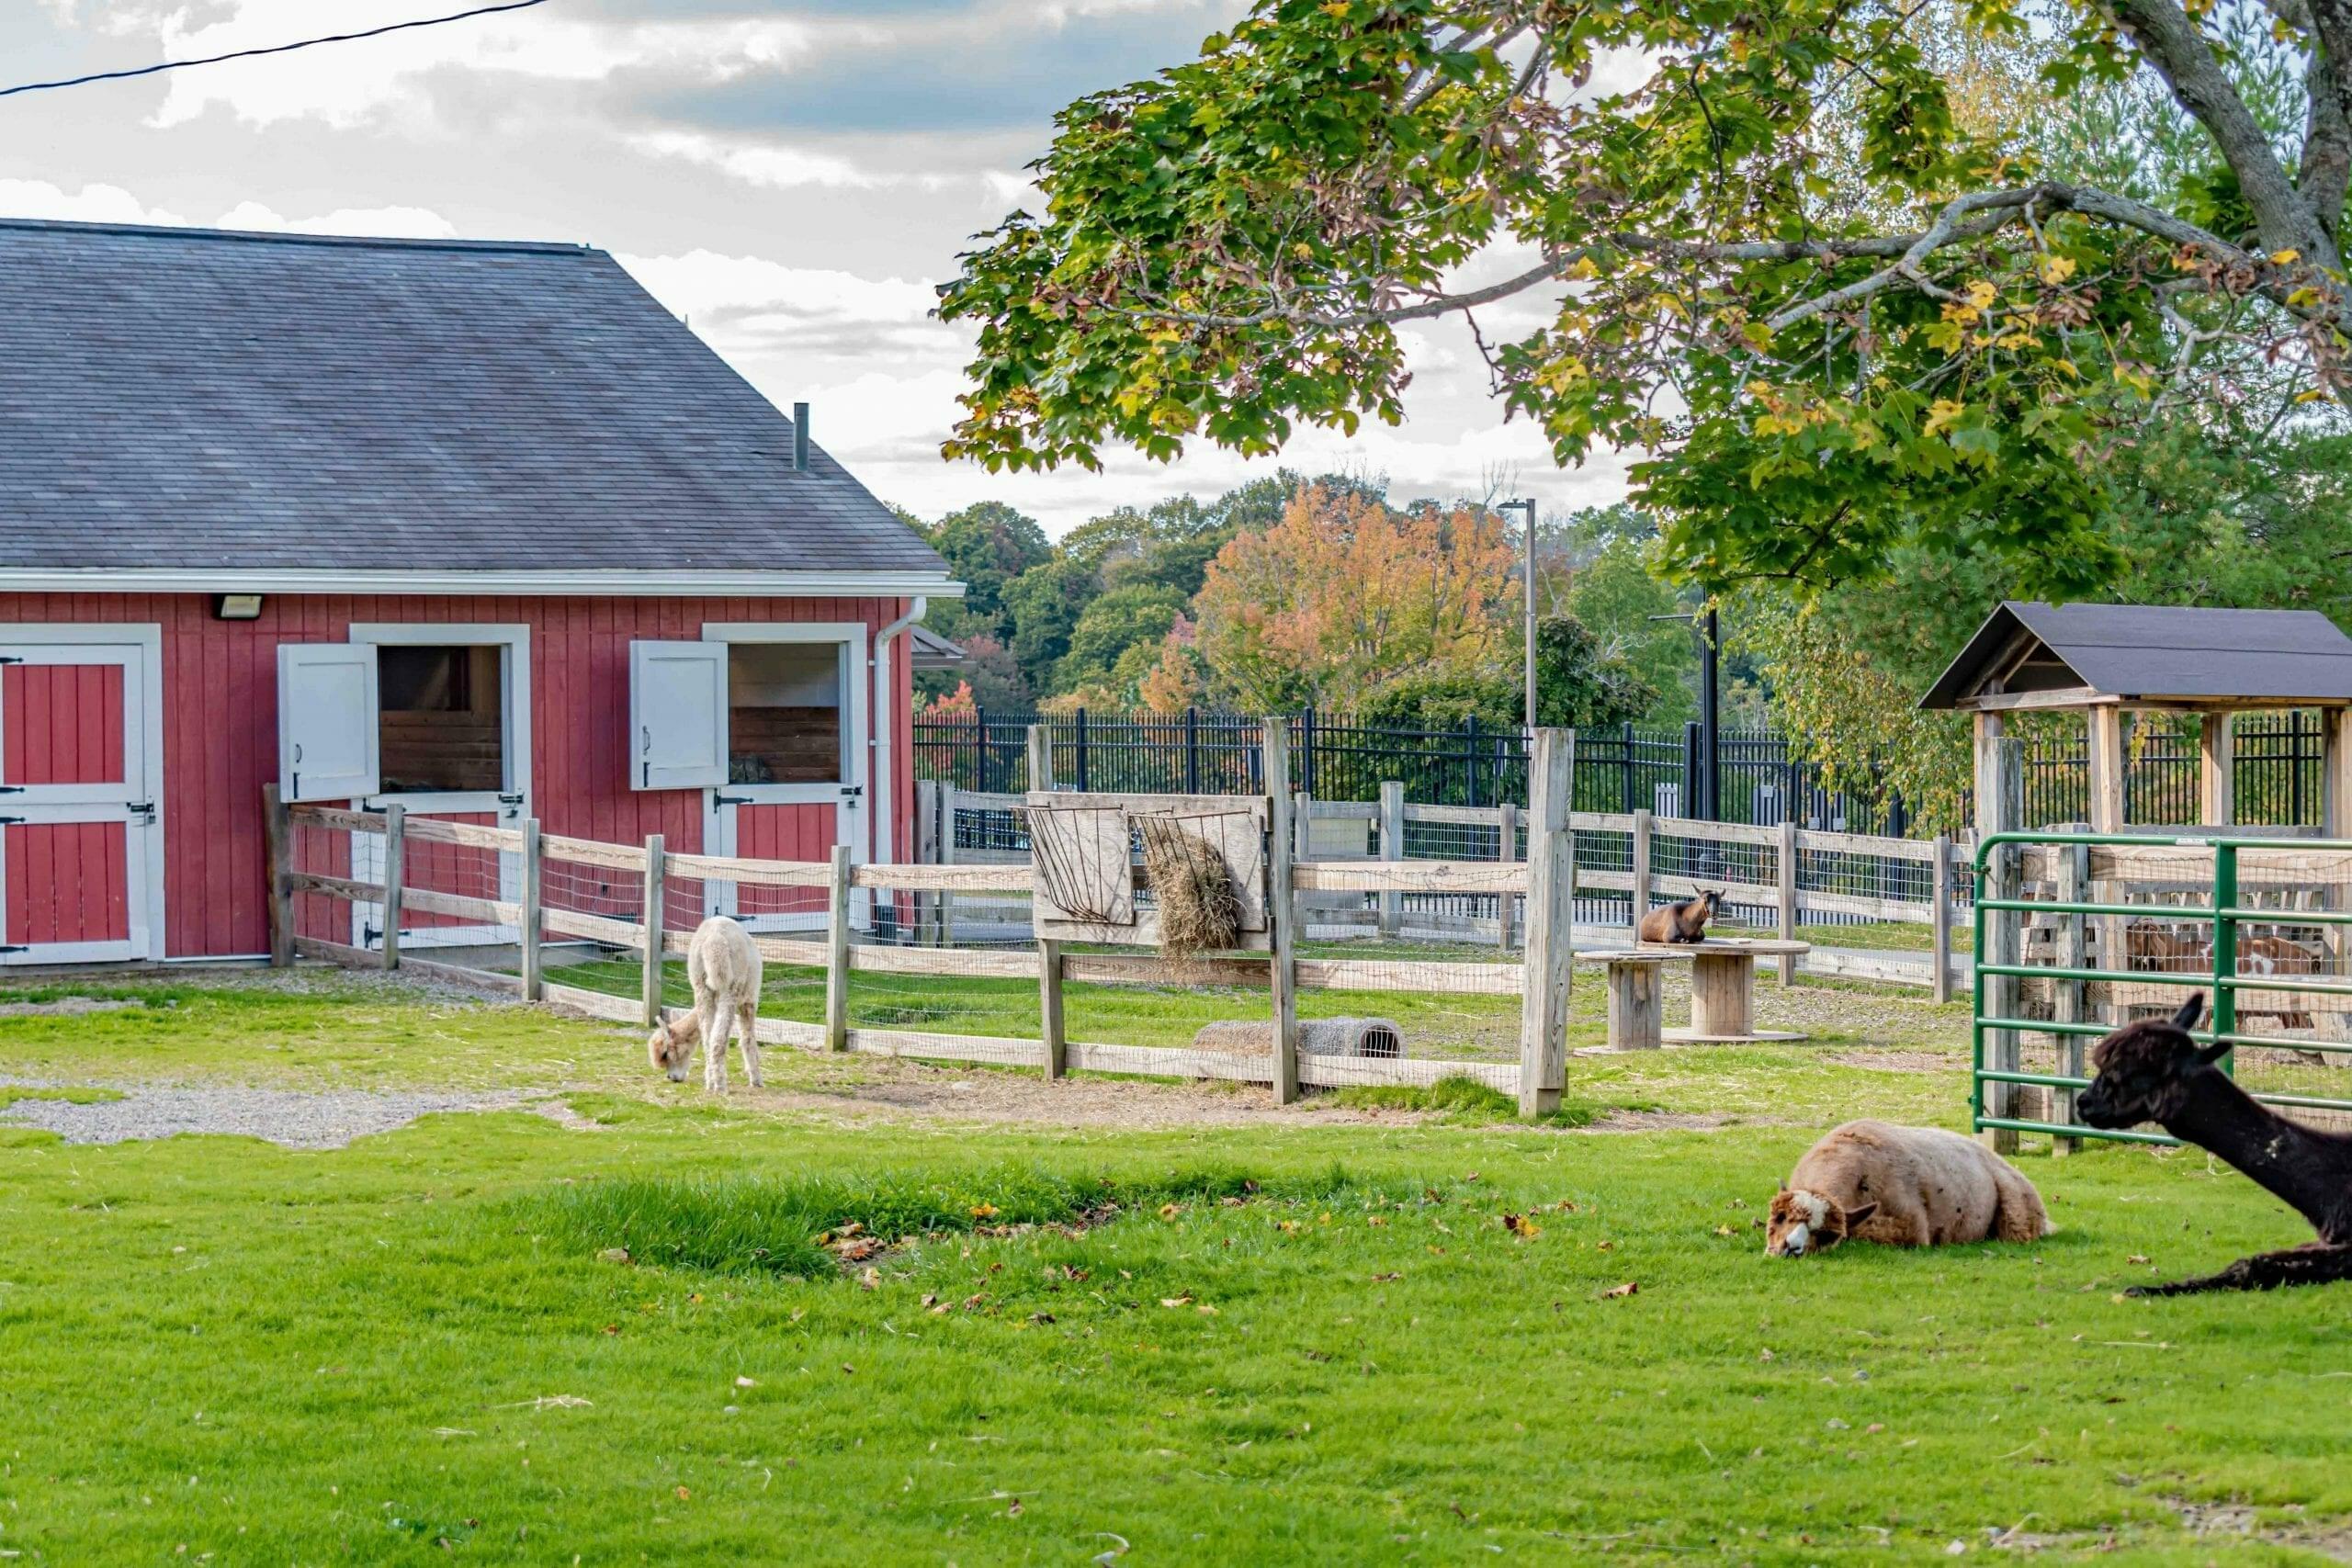 Visit the Animals at Green Hill Park